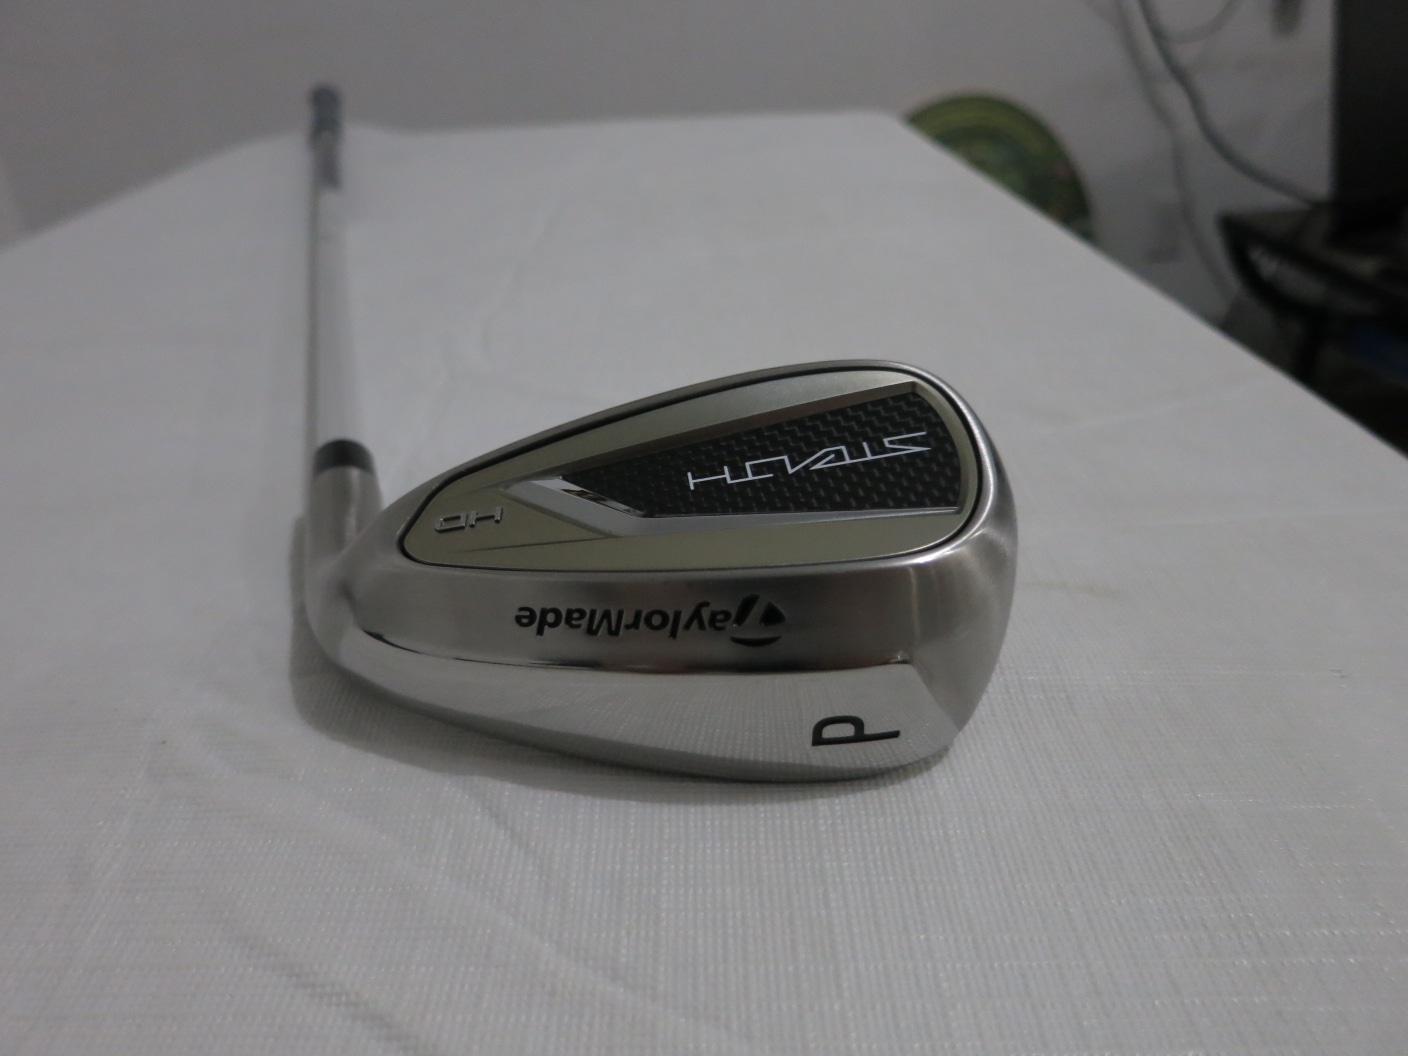 TaylorMade Stealth HD Pitching Wedge PW - 44.5*- Ladies Flex Graphite - MINT/NEW